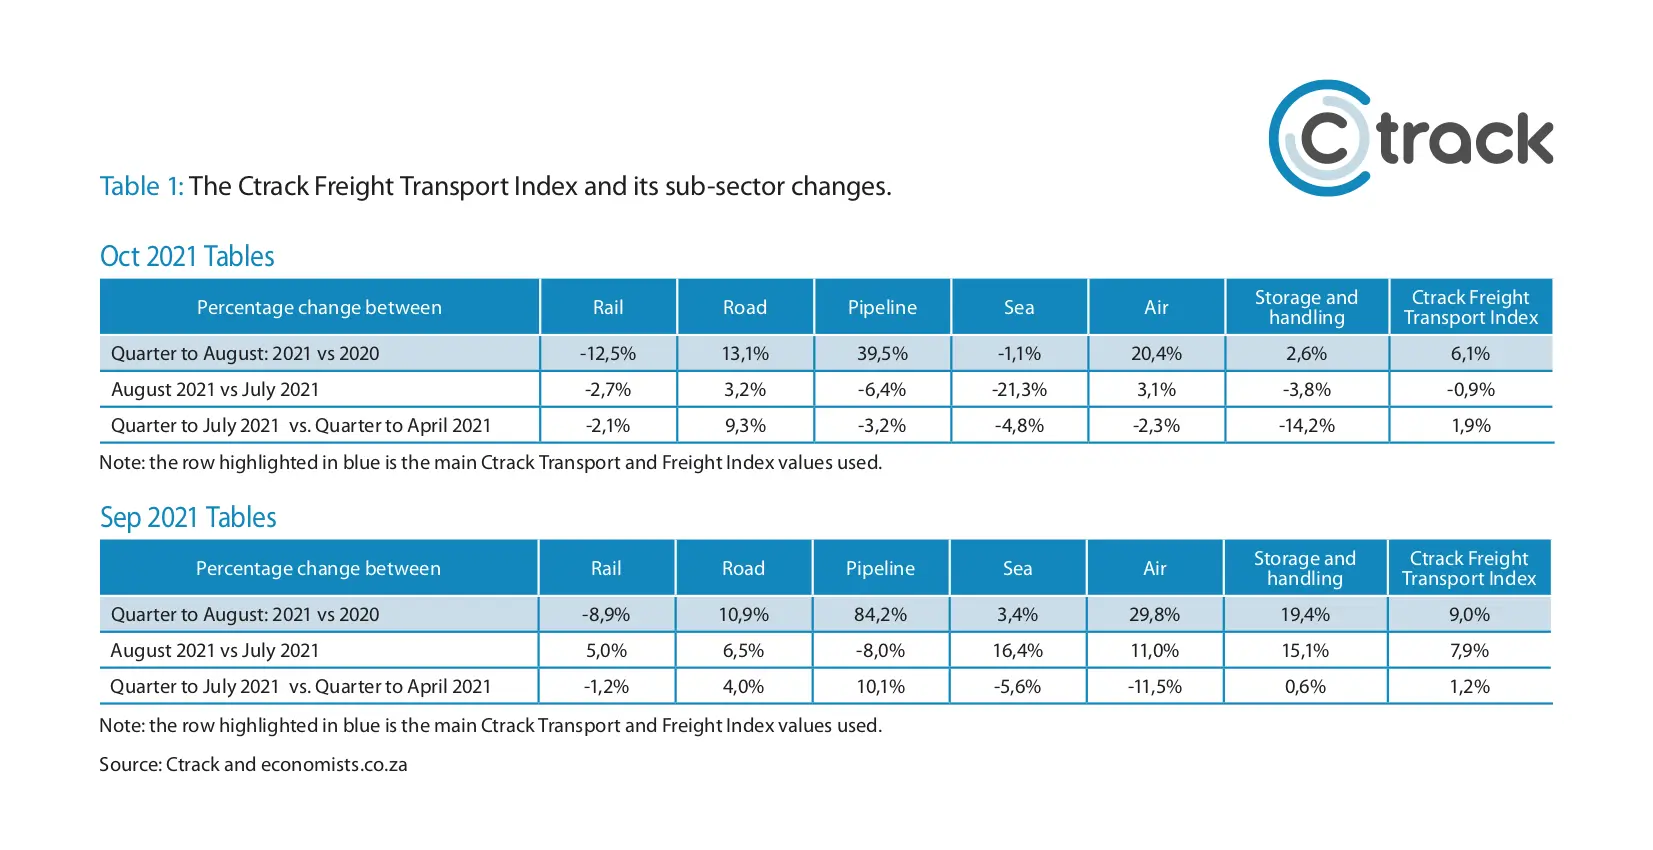 Ctrack November - Transport Freight Index Table 2021